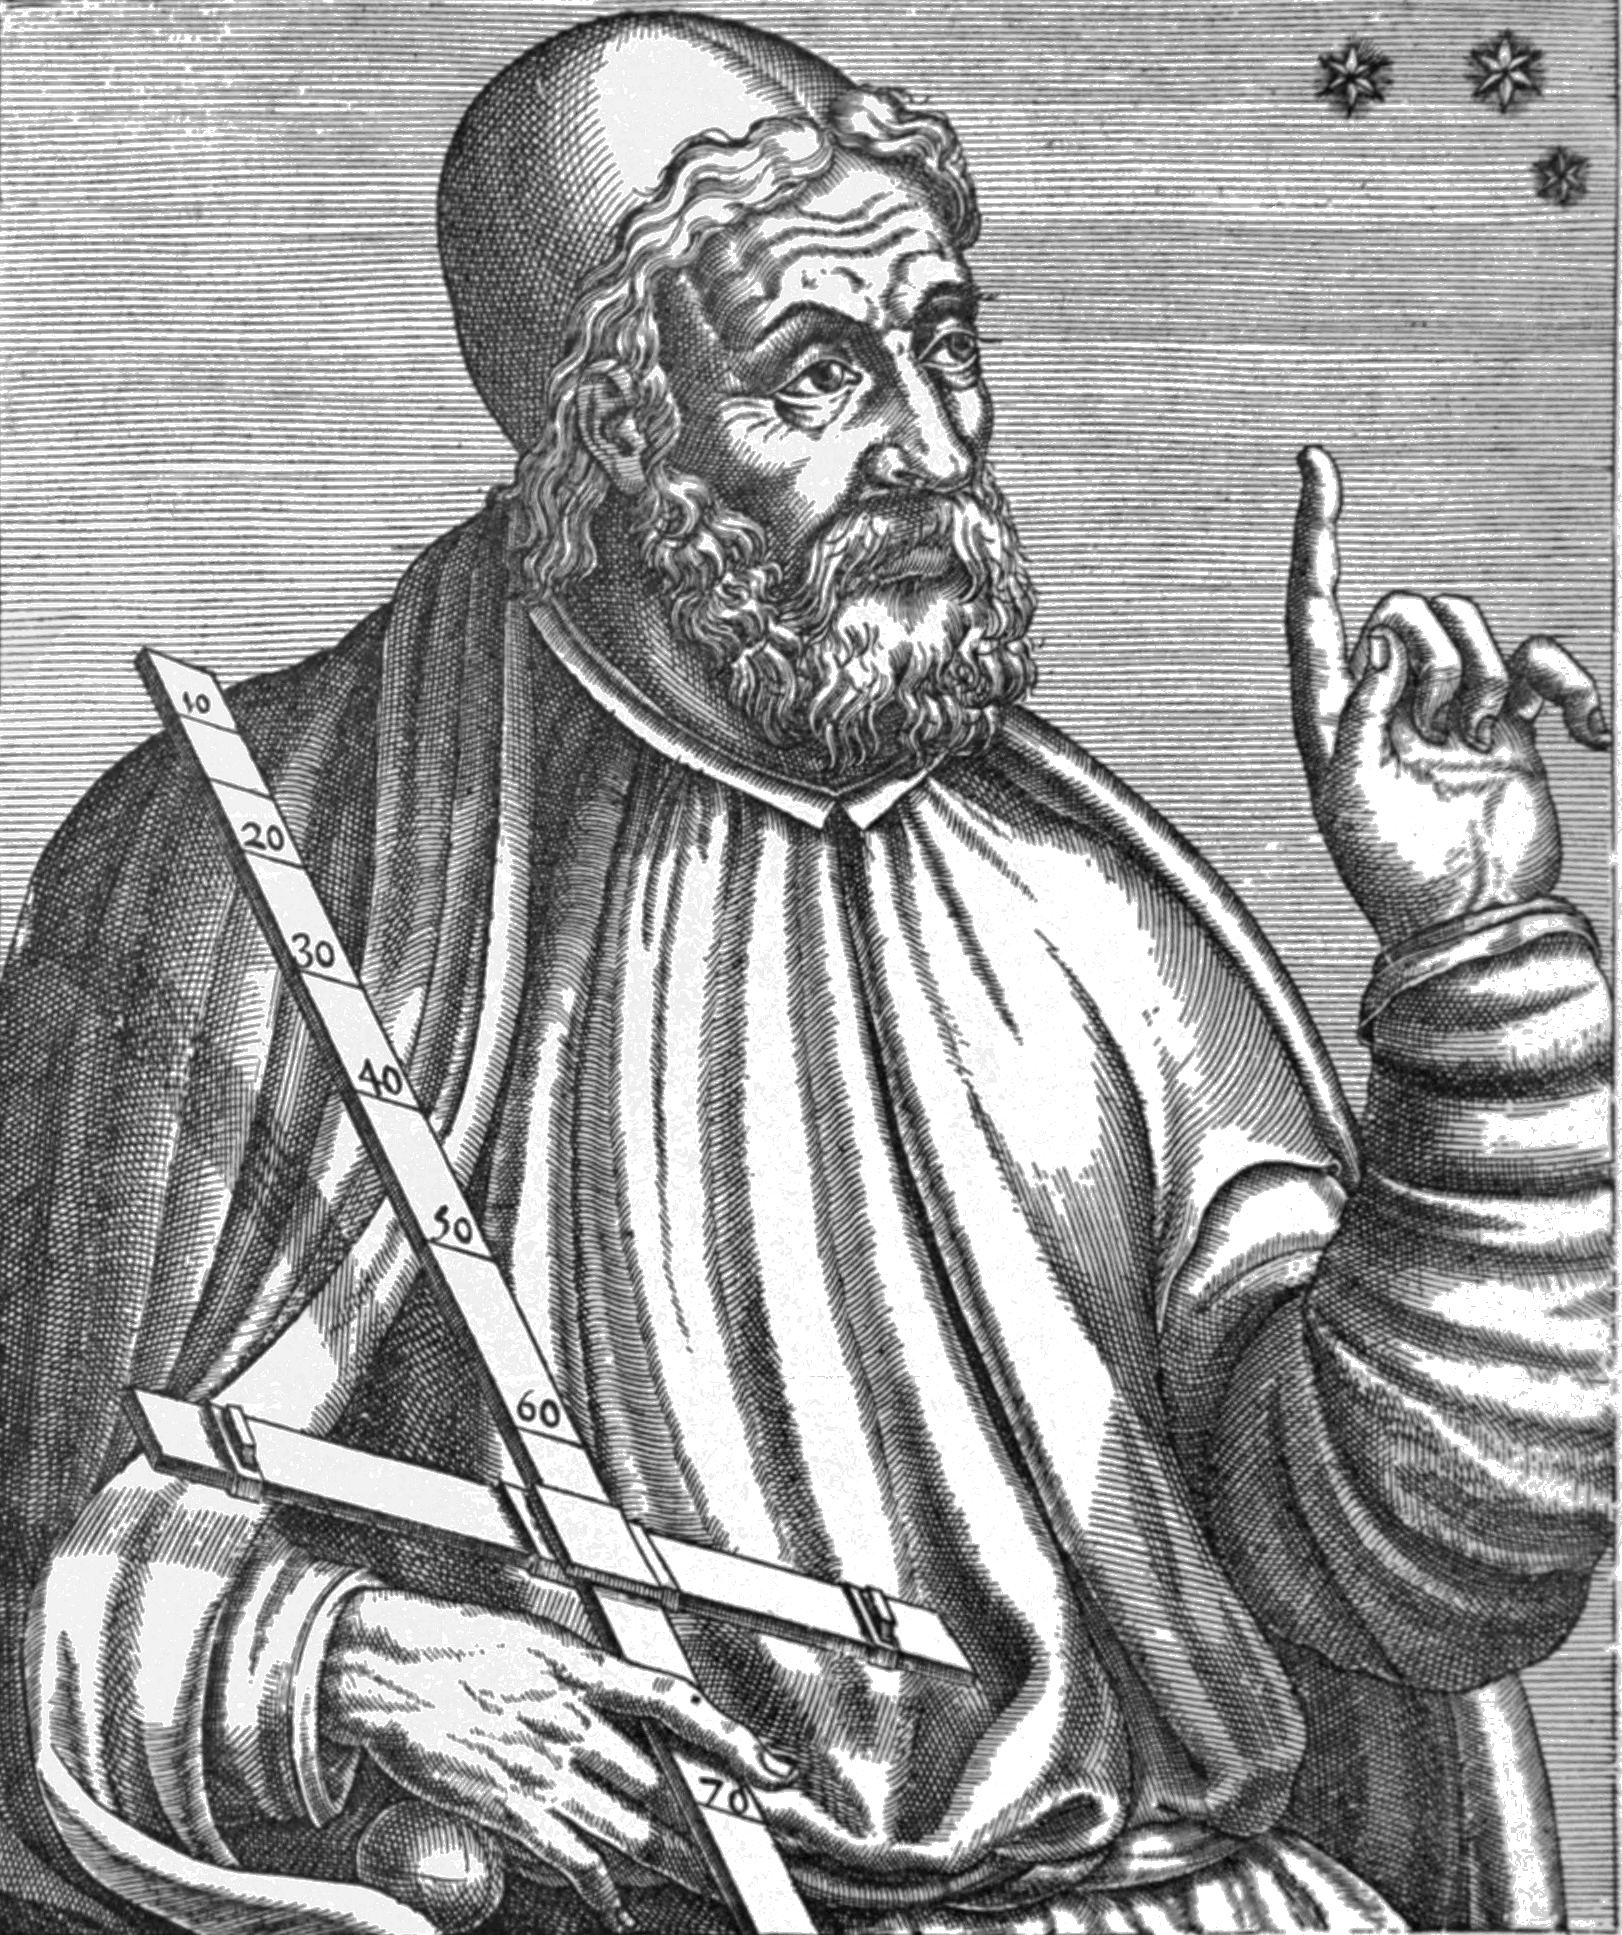 An image of the astronomer Ptolemy who distinguished Betelgeuse from other red stars.